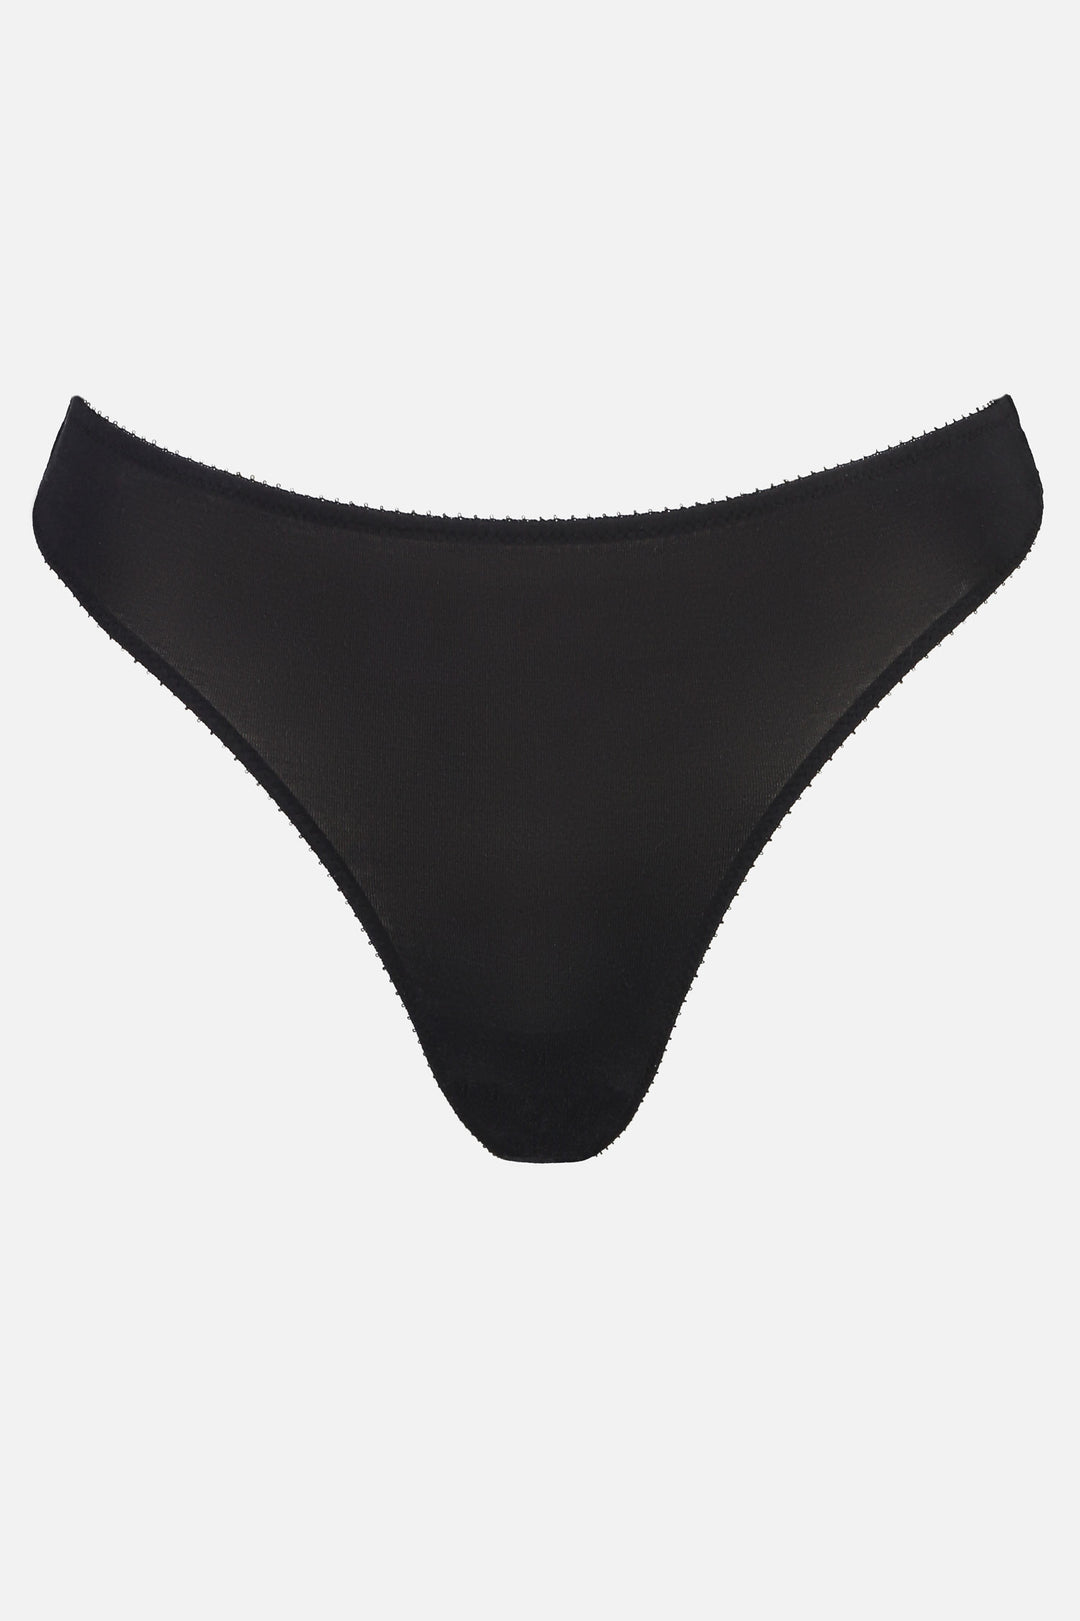 Videris Lingerie bikini knicker in black TENCEL™ a comfortable mid-rise style cut to follow the natural curve of your hips